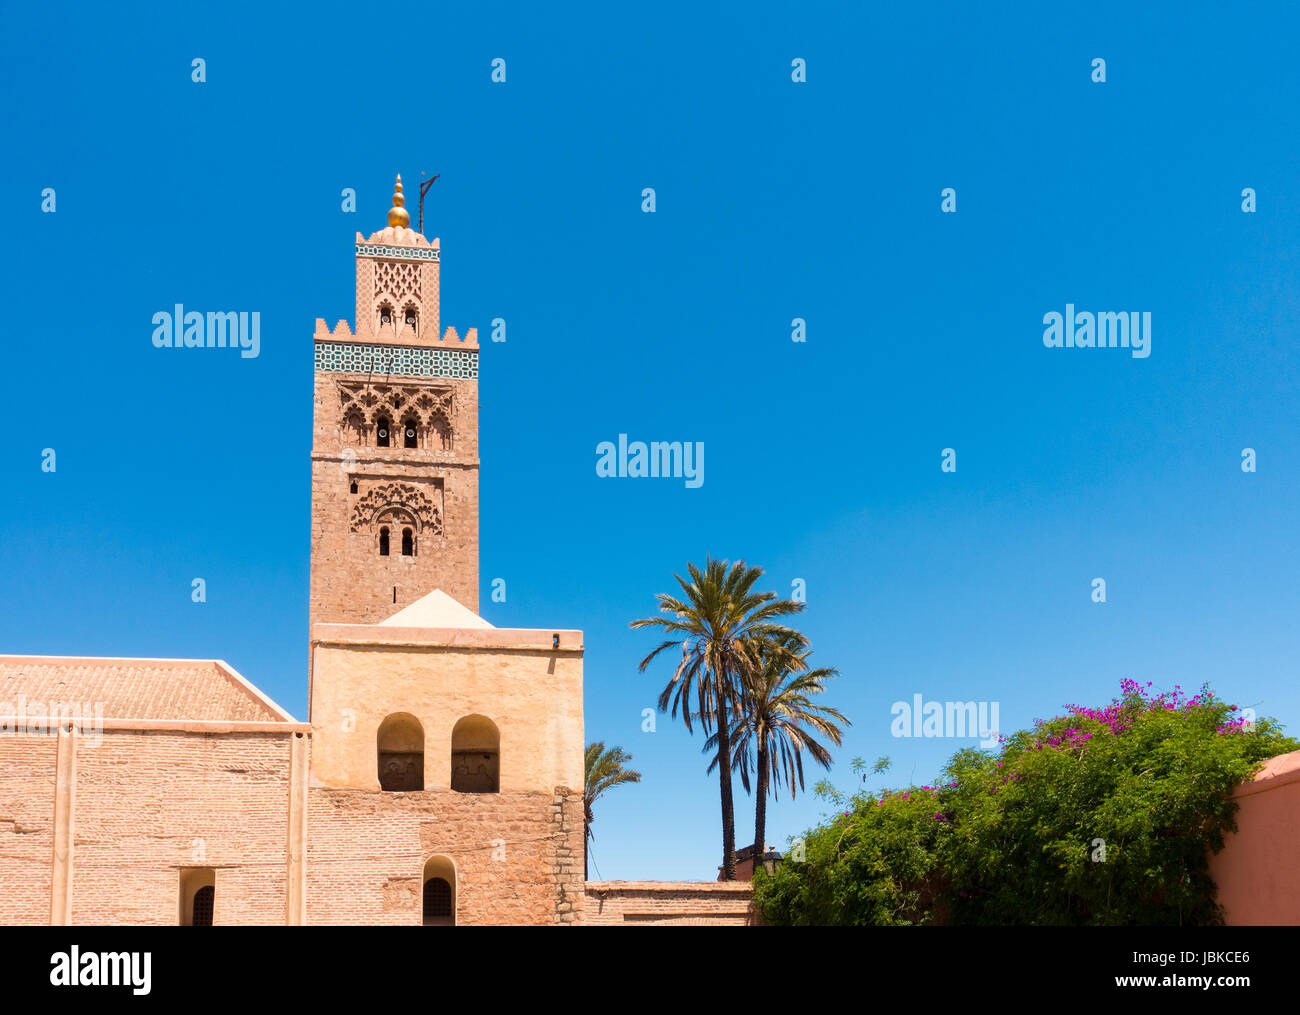 Closeup of the Koutoubia Mosque in Marrakech, Morocco, North Africa against clear blue sky. Stock Photo